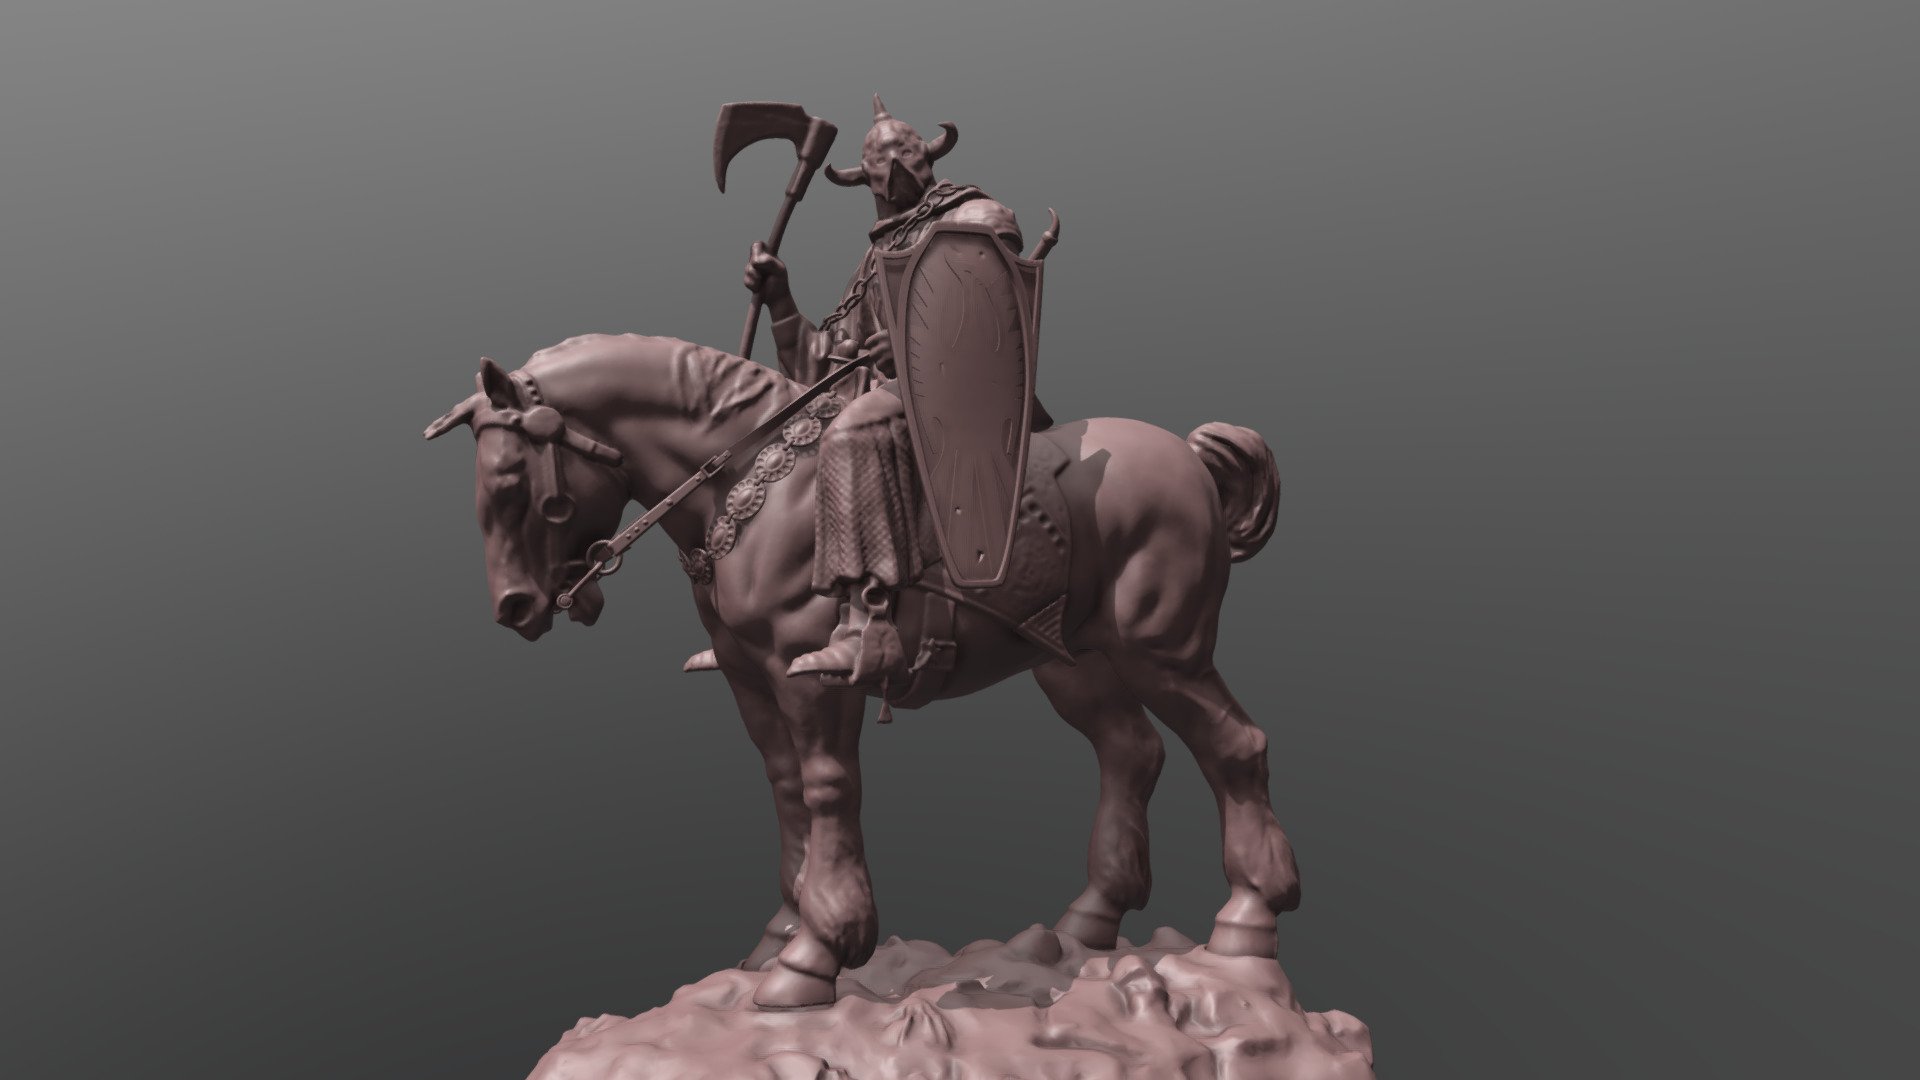 This is a scan of the Mobius model of Frazetta's iconic painting, the Death Dealer.  The majority of this model is scanned, however some of the smaller parts, like the shield, the sword, chain, bridle and reins were recreated in Solidworks, as they were too small to scan properly.

The model is actually comprised of a few separate parts for easy 3D printing.  The original parts add up to more than 1GB of data, but had to be reduced dramatically to fit within the 50MB maximum upload size 3d model